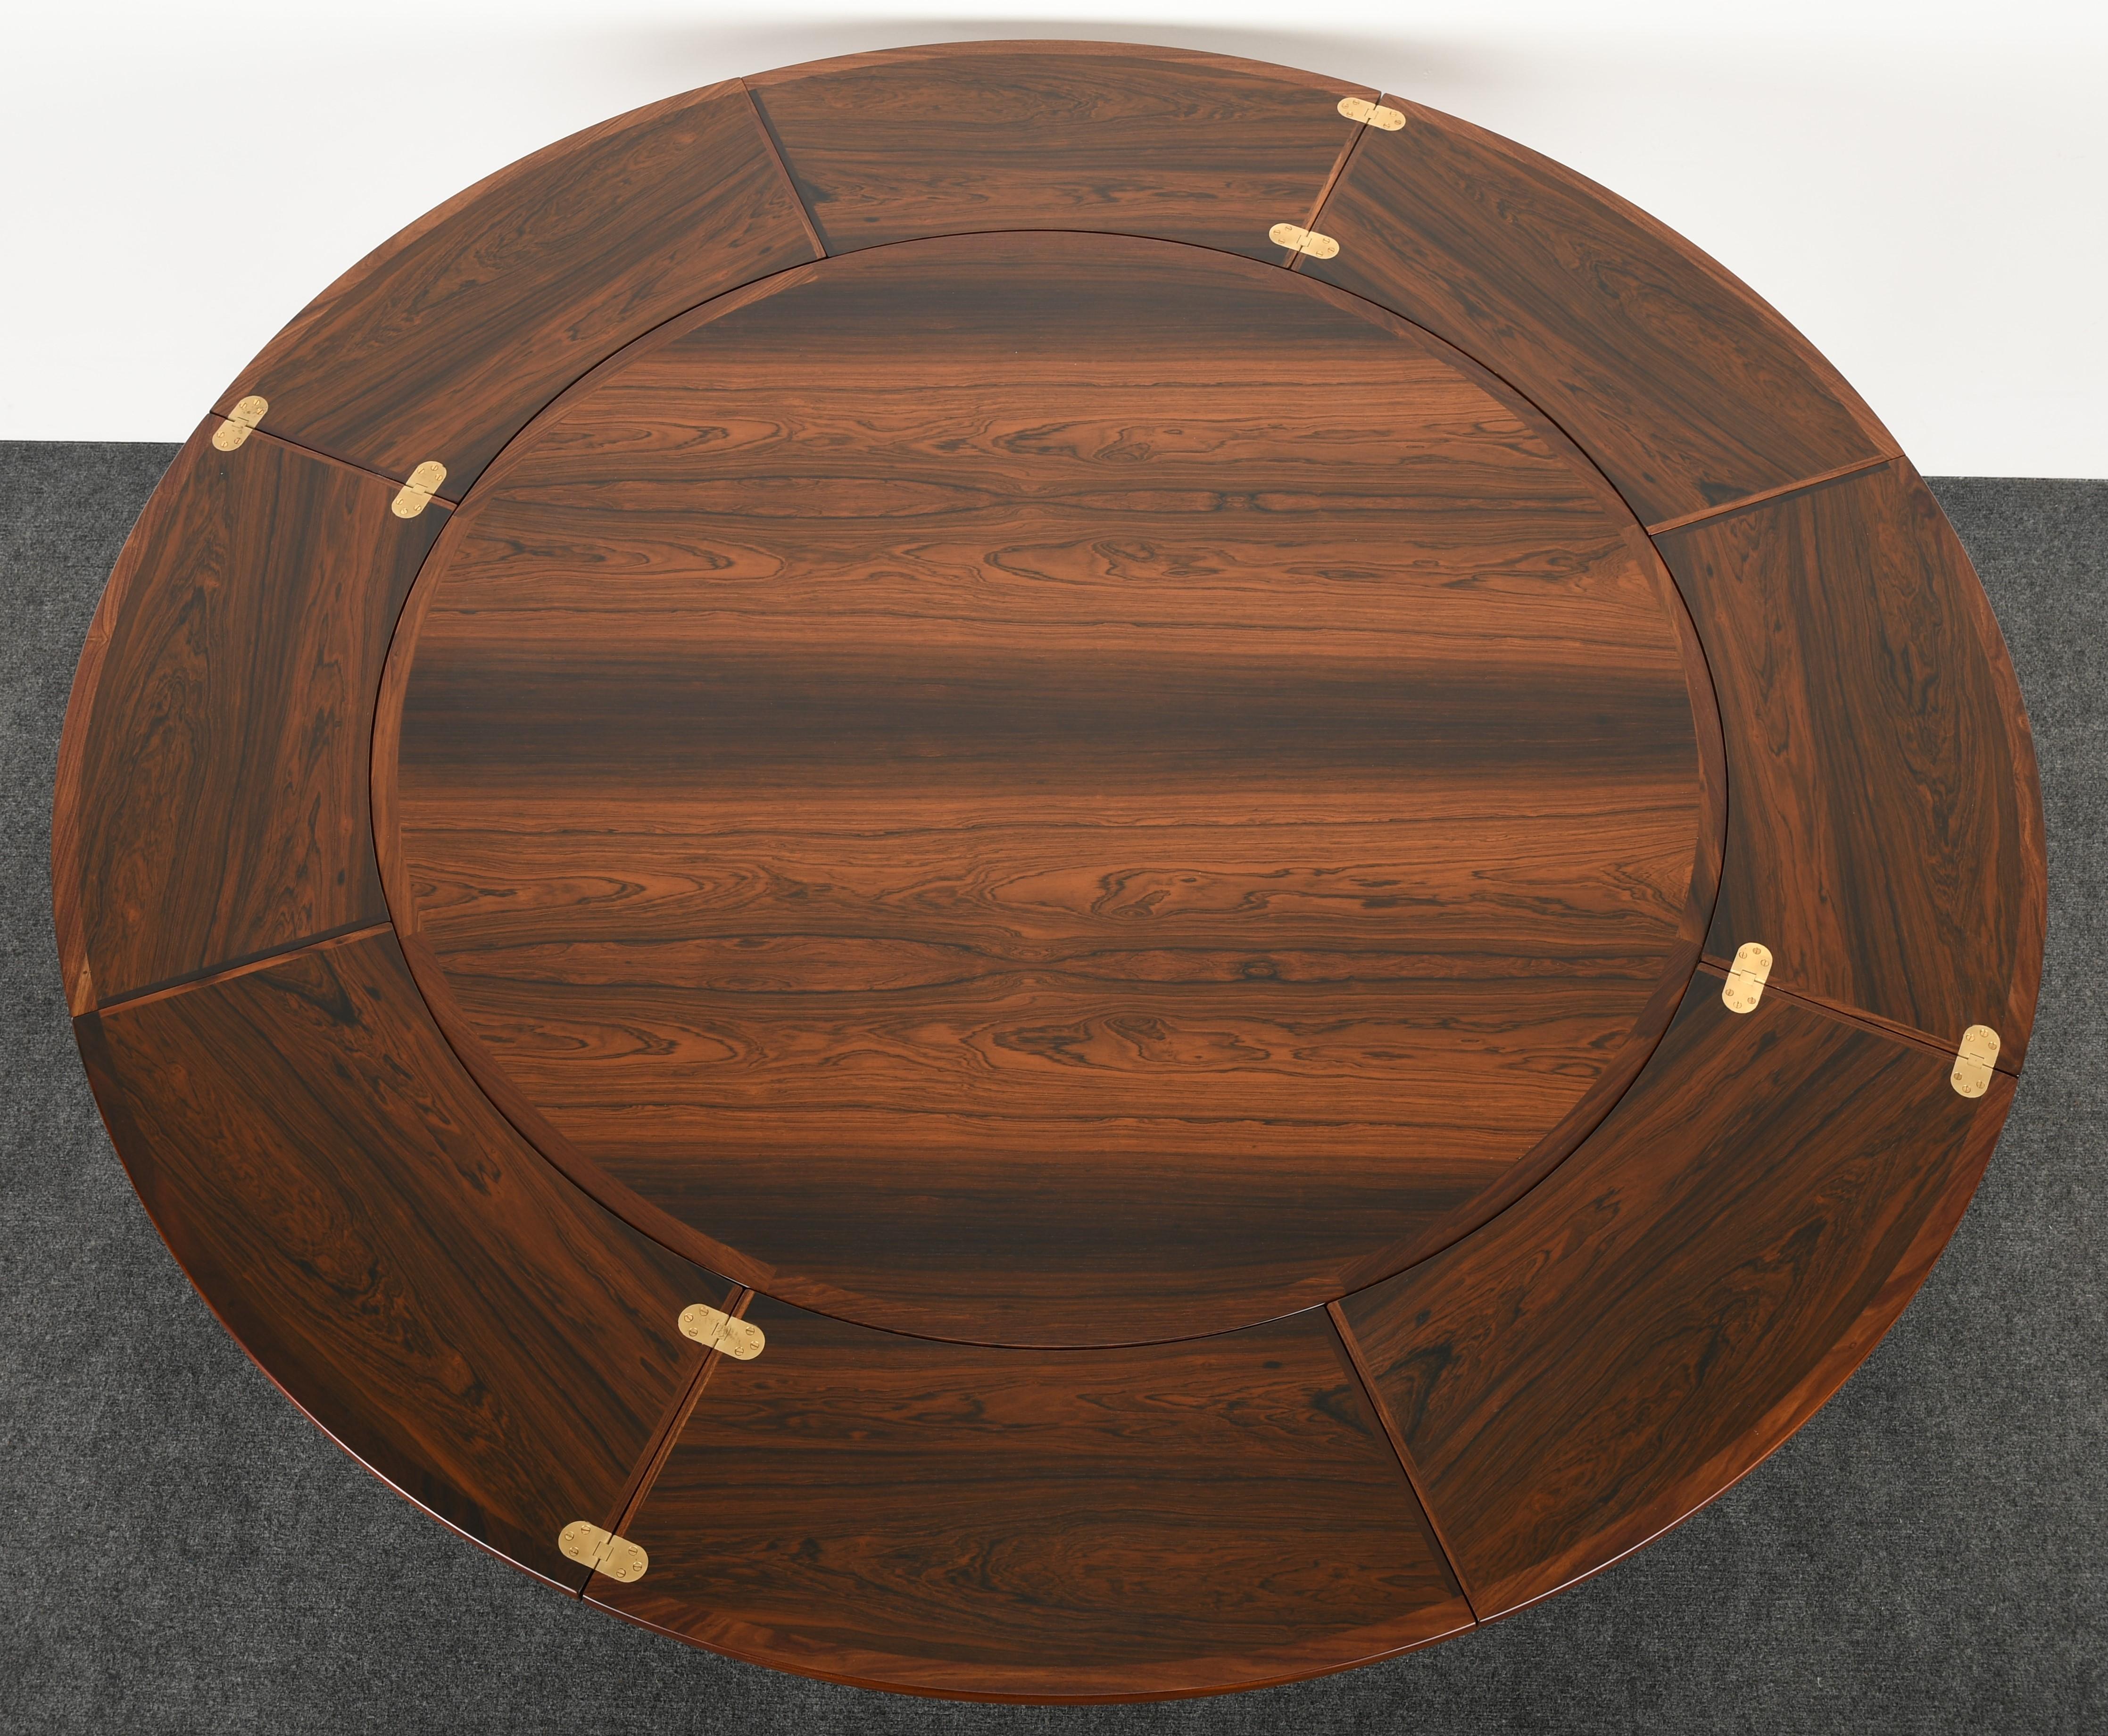 A gorgeous round rosewood flip-top extension table by Dyrlund. This amazing table can be used in several different ways for ample space. The versatile table pulls out from underneath and flips sideways to create a larger table, as shown in the